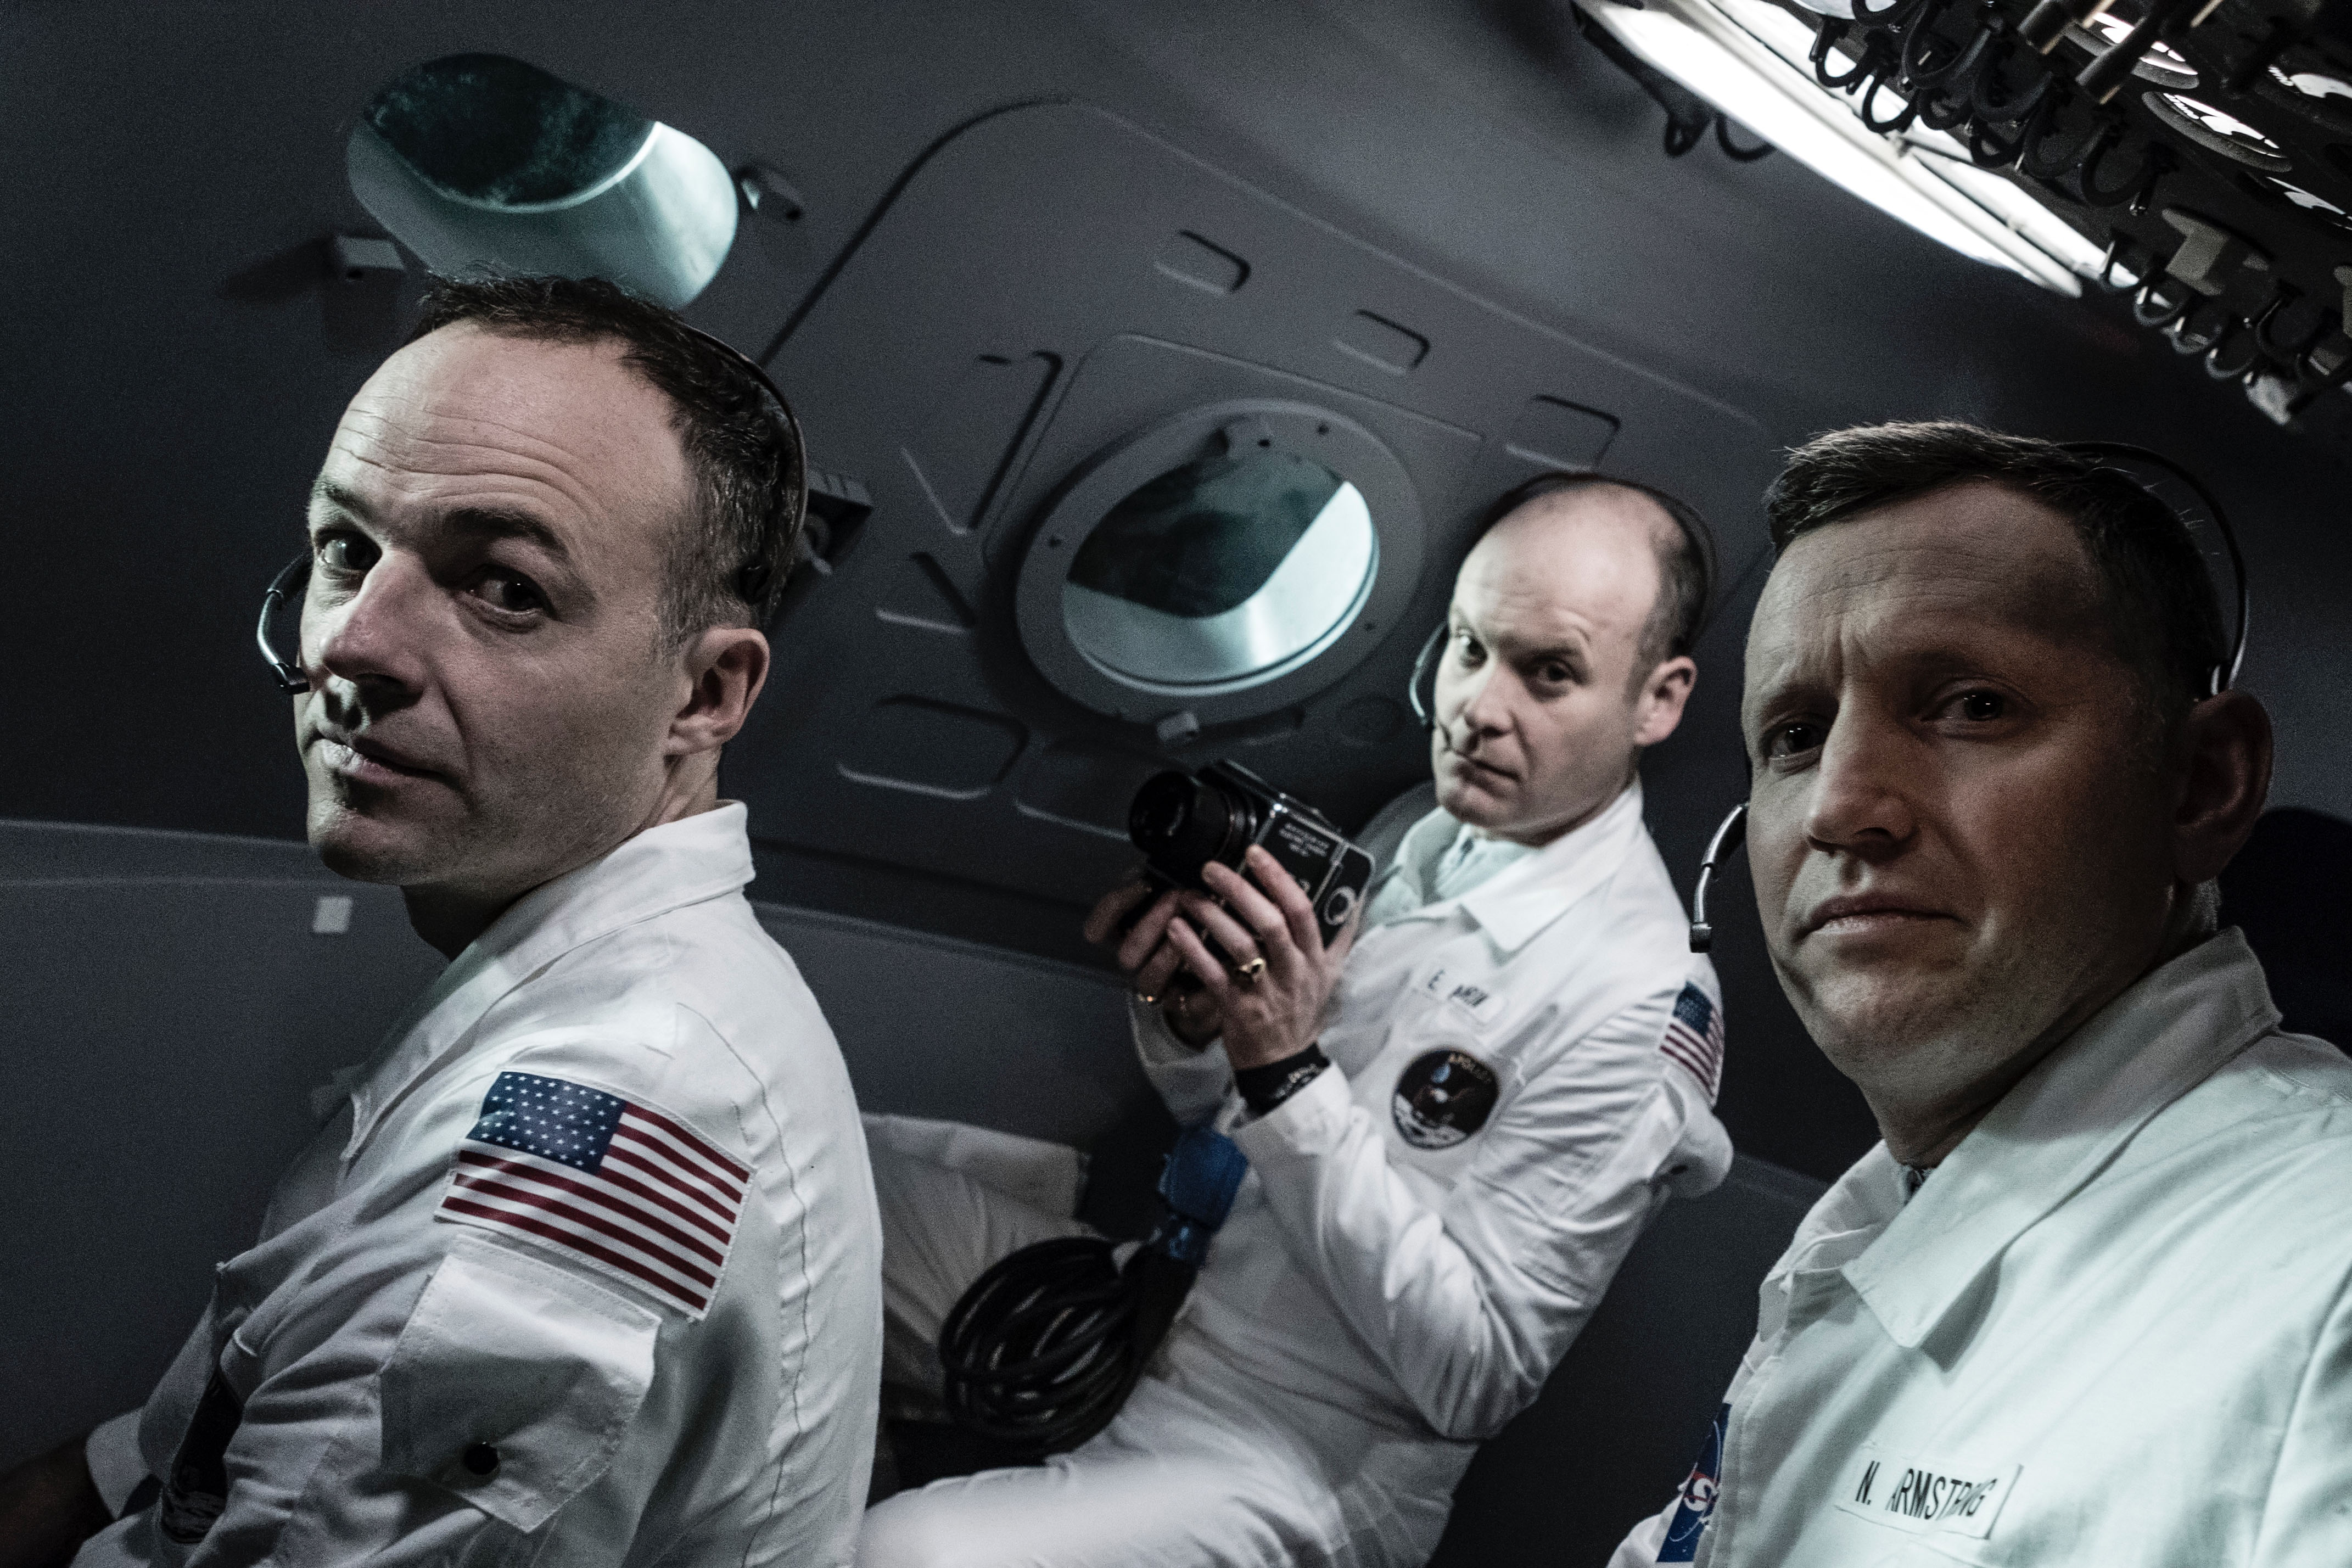 Michael Collins (Patrick Kennedy), Neil Armstrong (Rufus Wright) and Buzz Aldrin (Jack Tarlton).